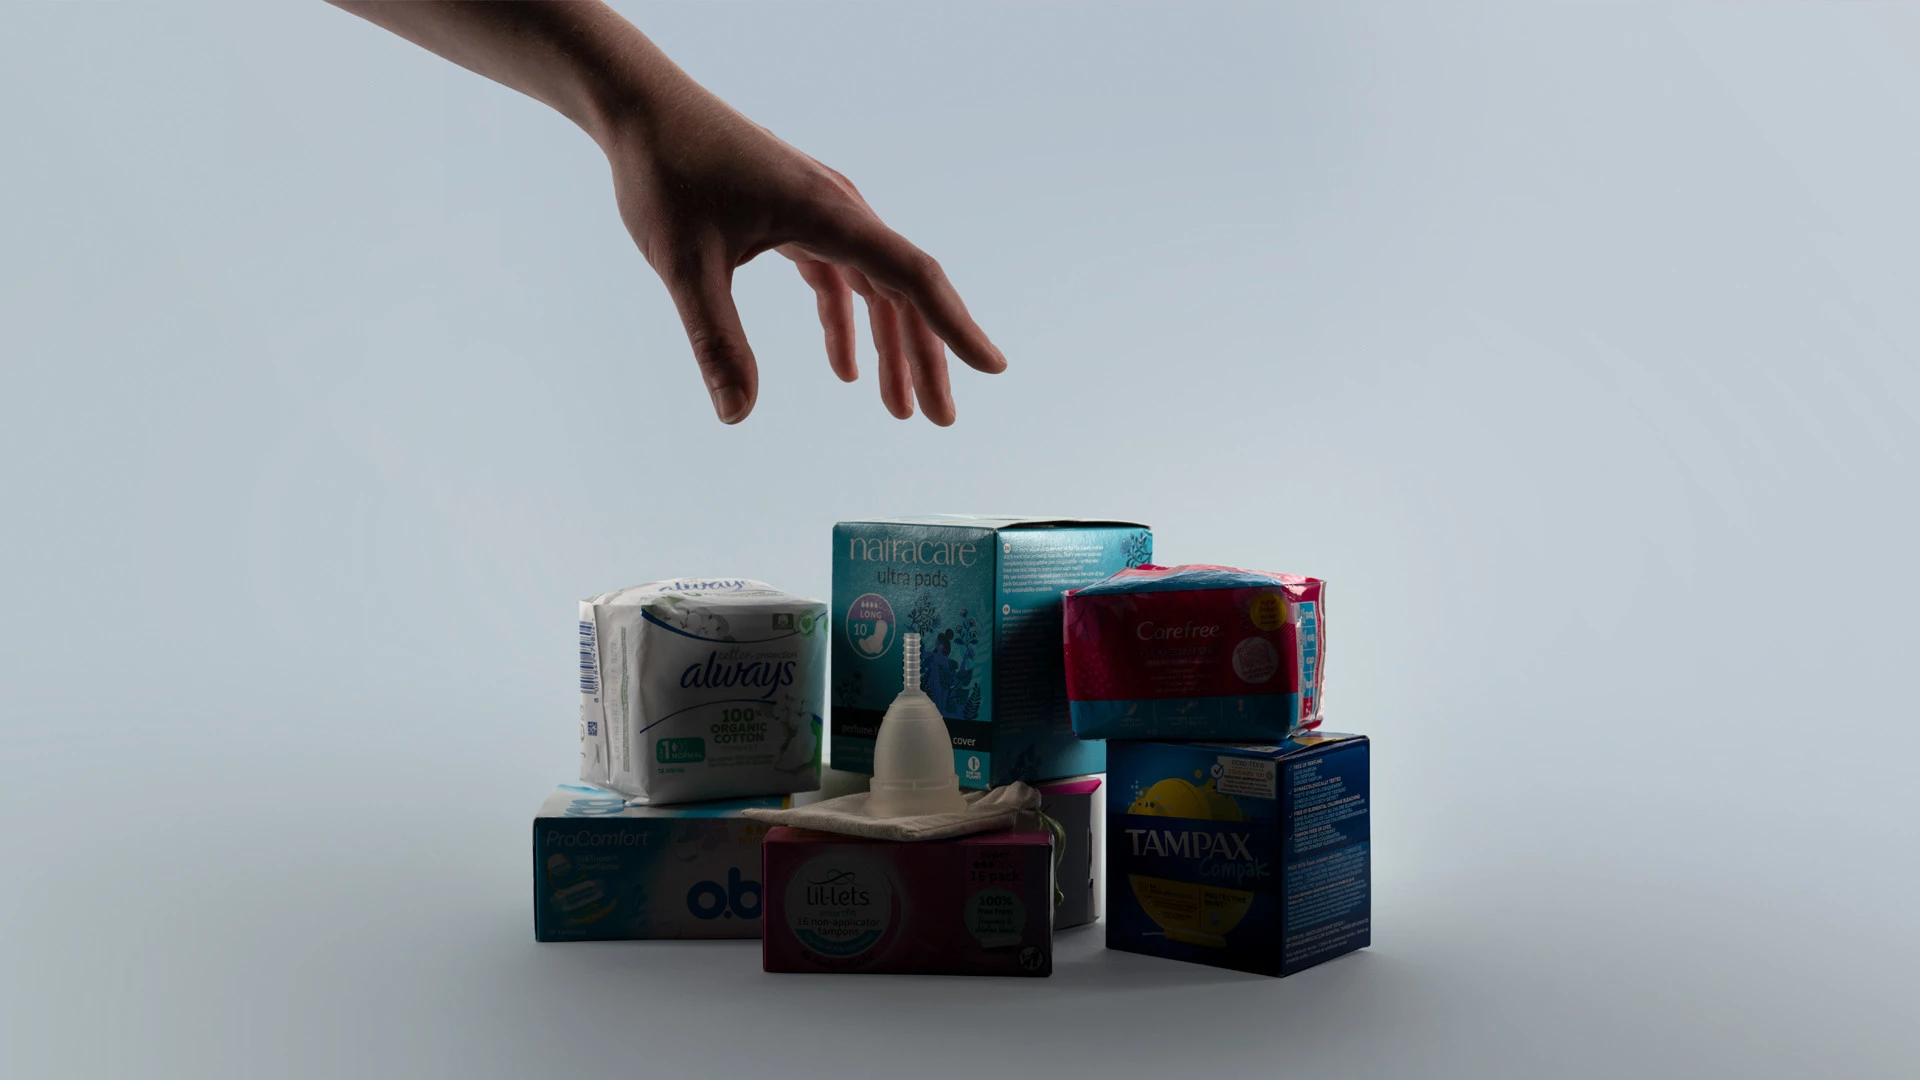 Hand reaching for a selection of period products, including pads, tampons and menstrual cup